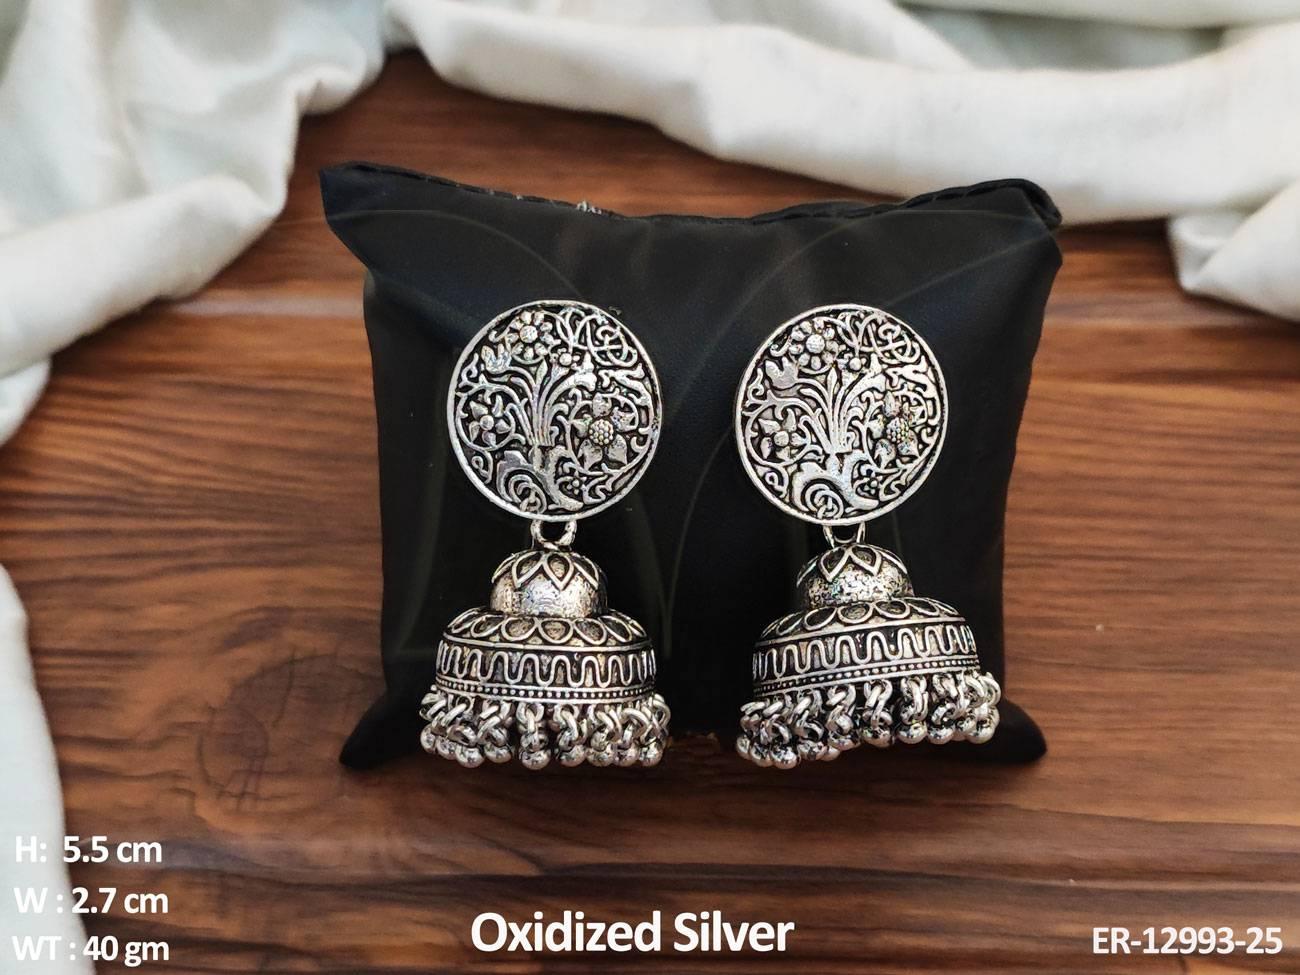 Made with high-quality materials and a unique oxidized finish, these earrings add a touch of sophistication to any outfit.